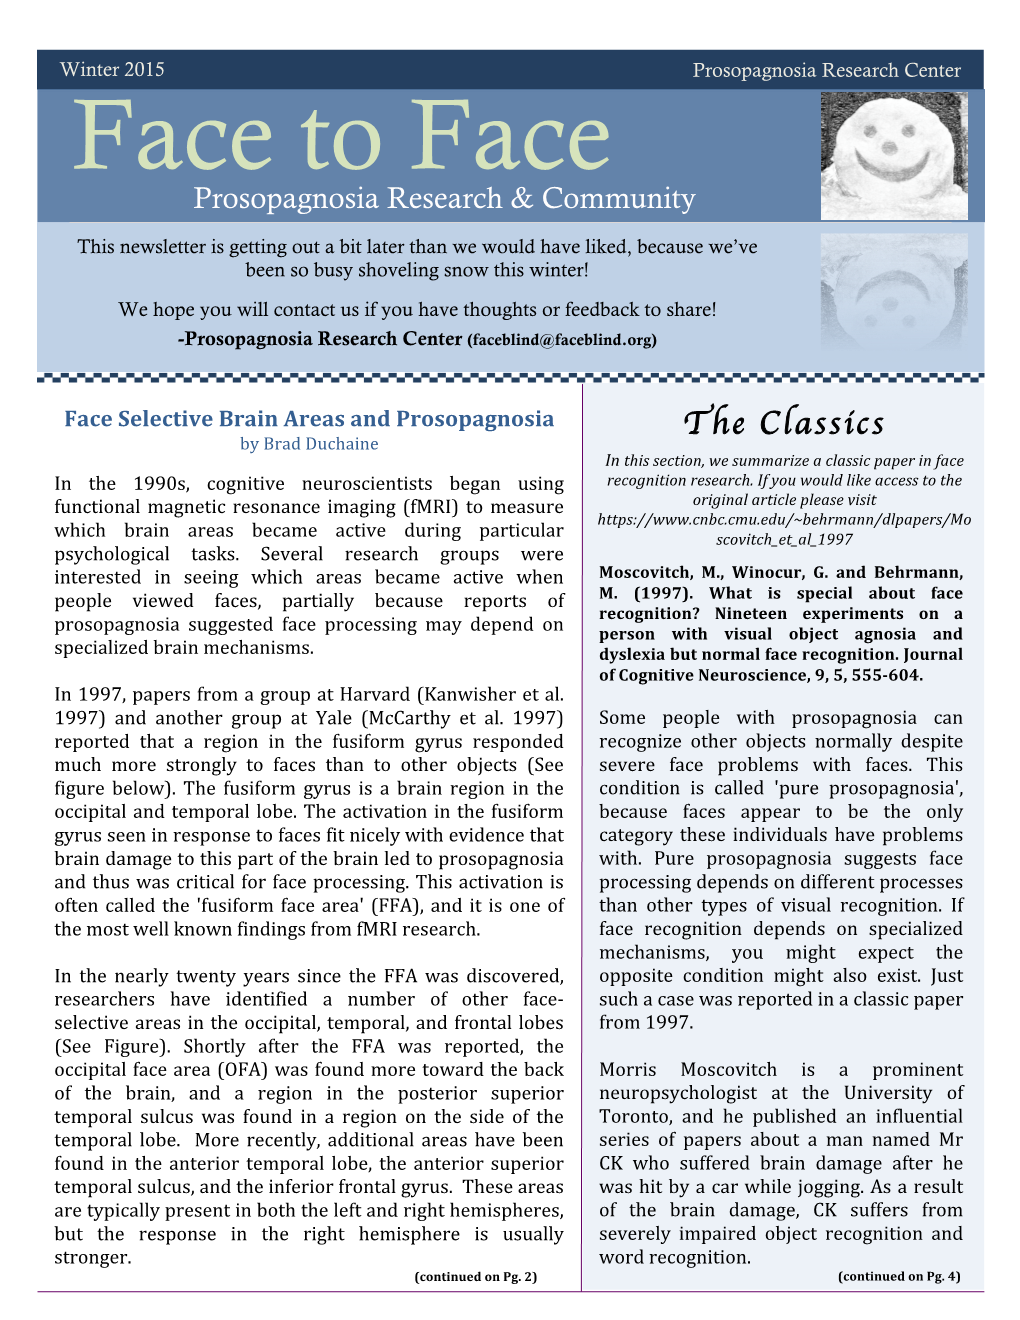 Face to Face Newsletter